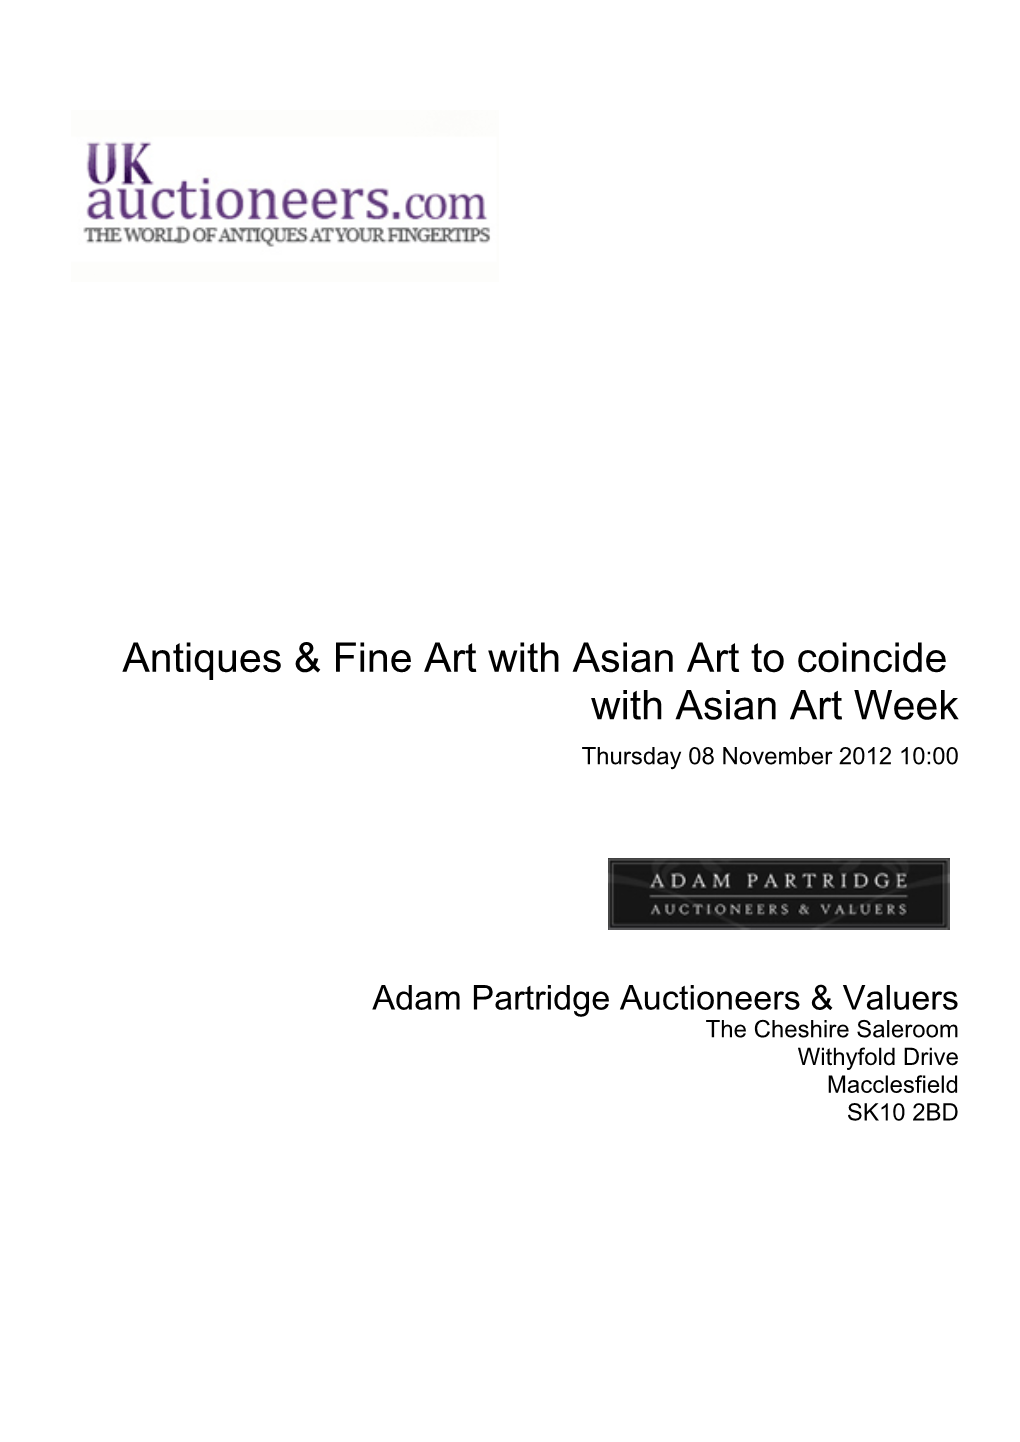 Antiques & Fine Art with Asian Art to Coincide with Asian Art Week